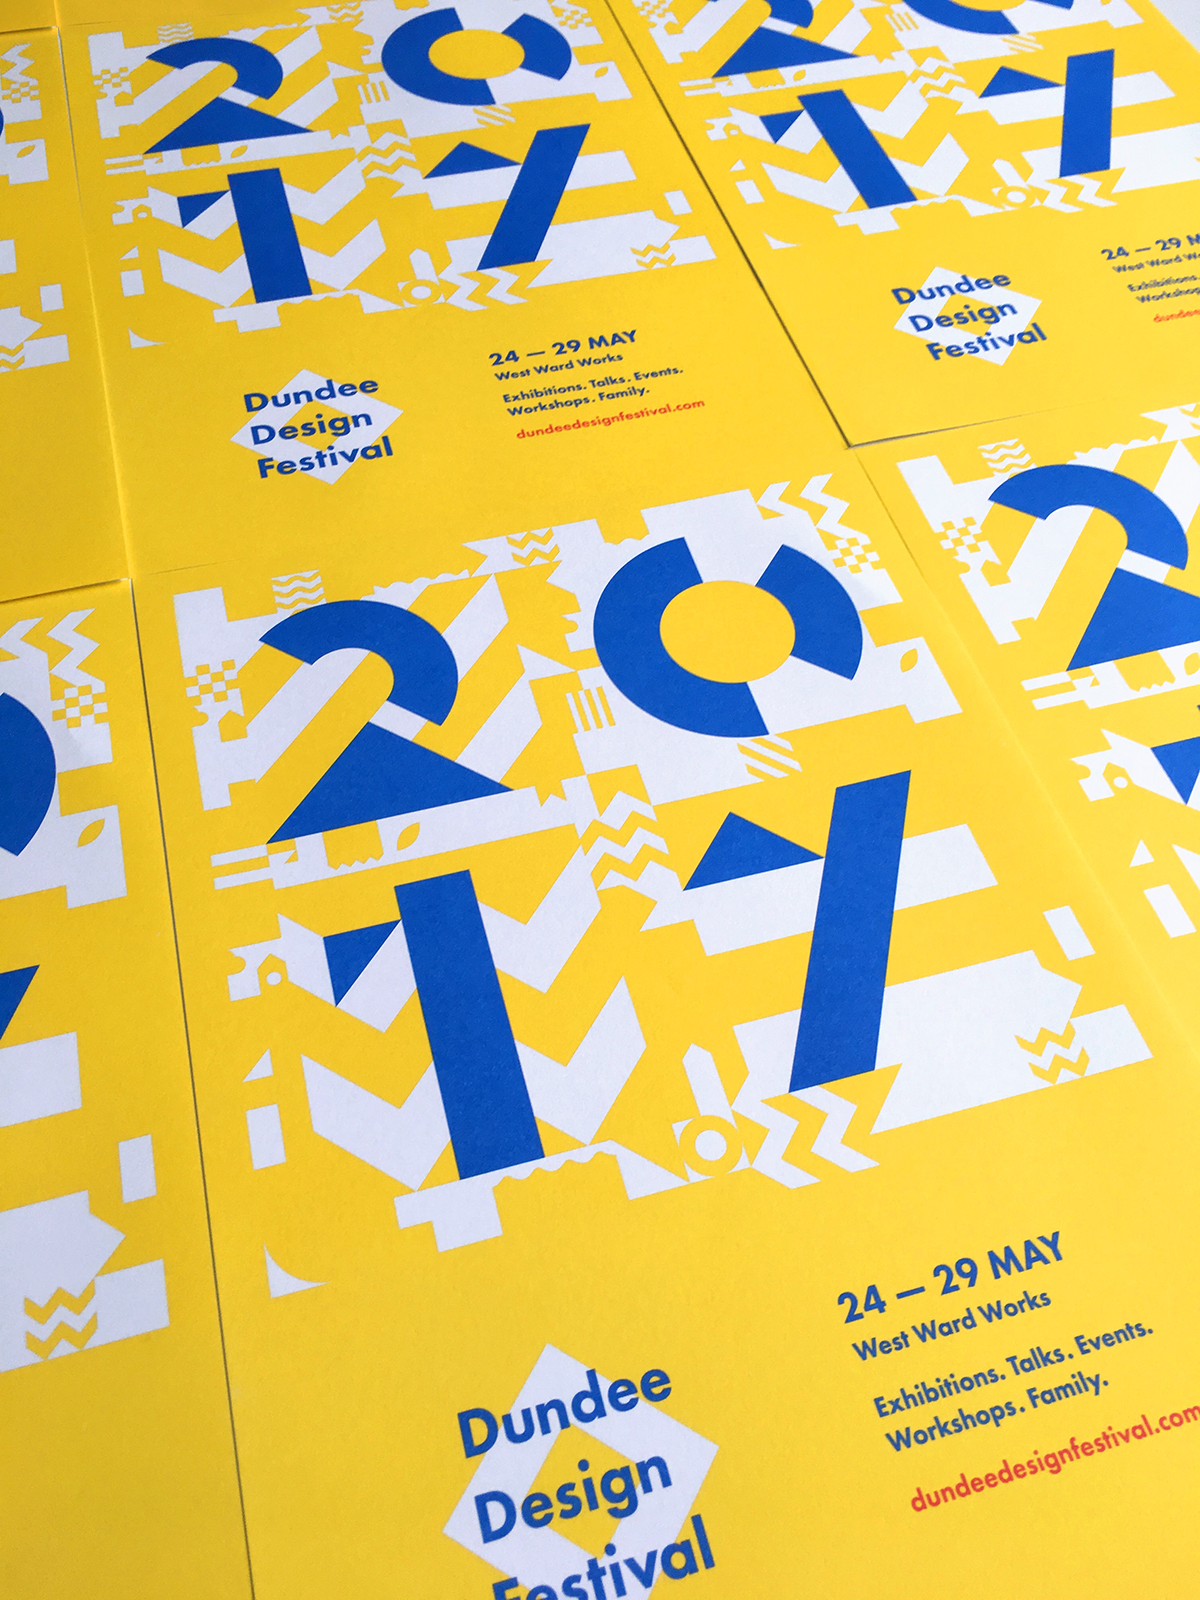 design graphics dundee dundee design festival type yellow blue FLOOR factory industrial identity logo scotland